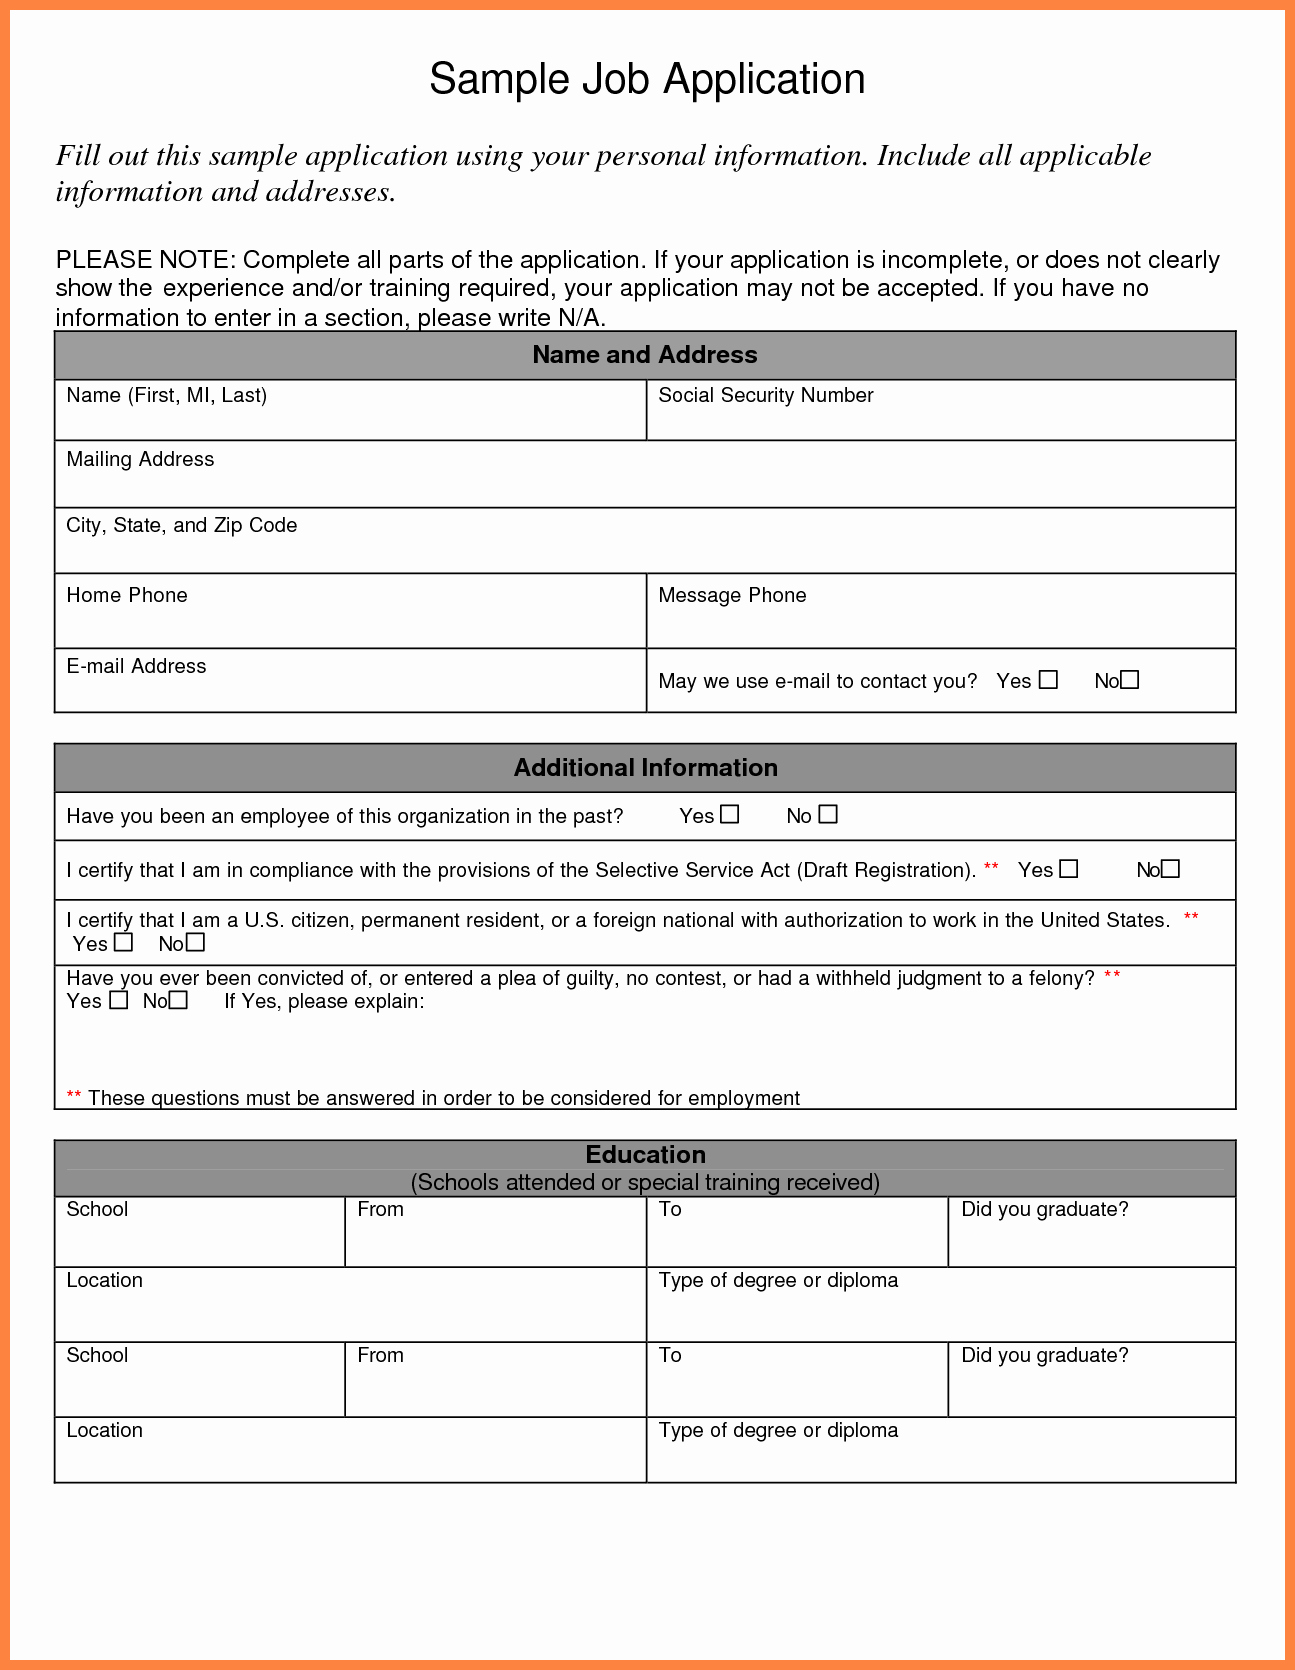 Job Application form Sample Awesome 8 Sample Employment Application